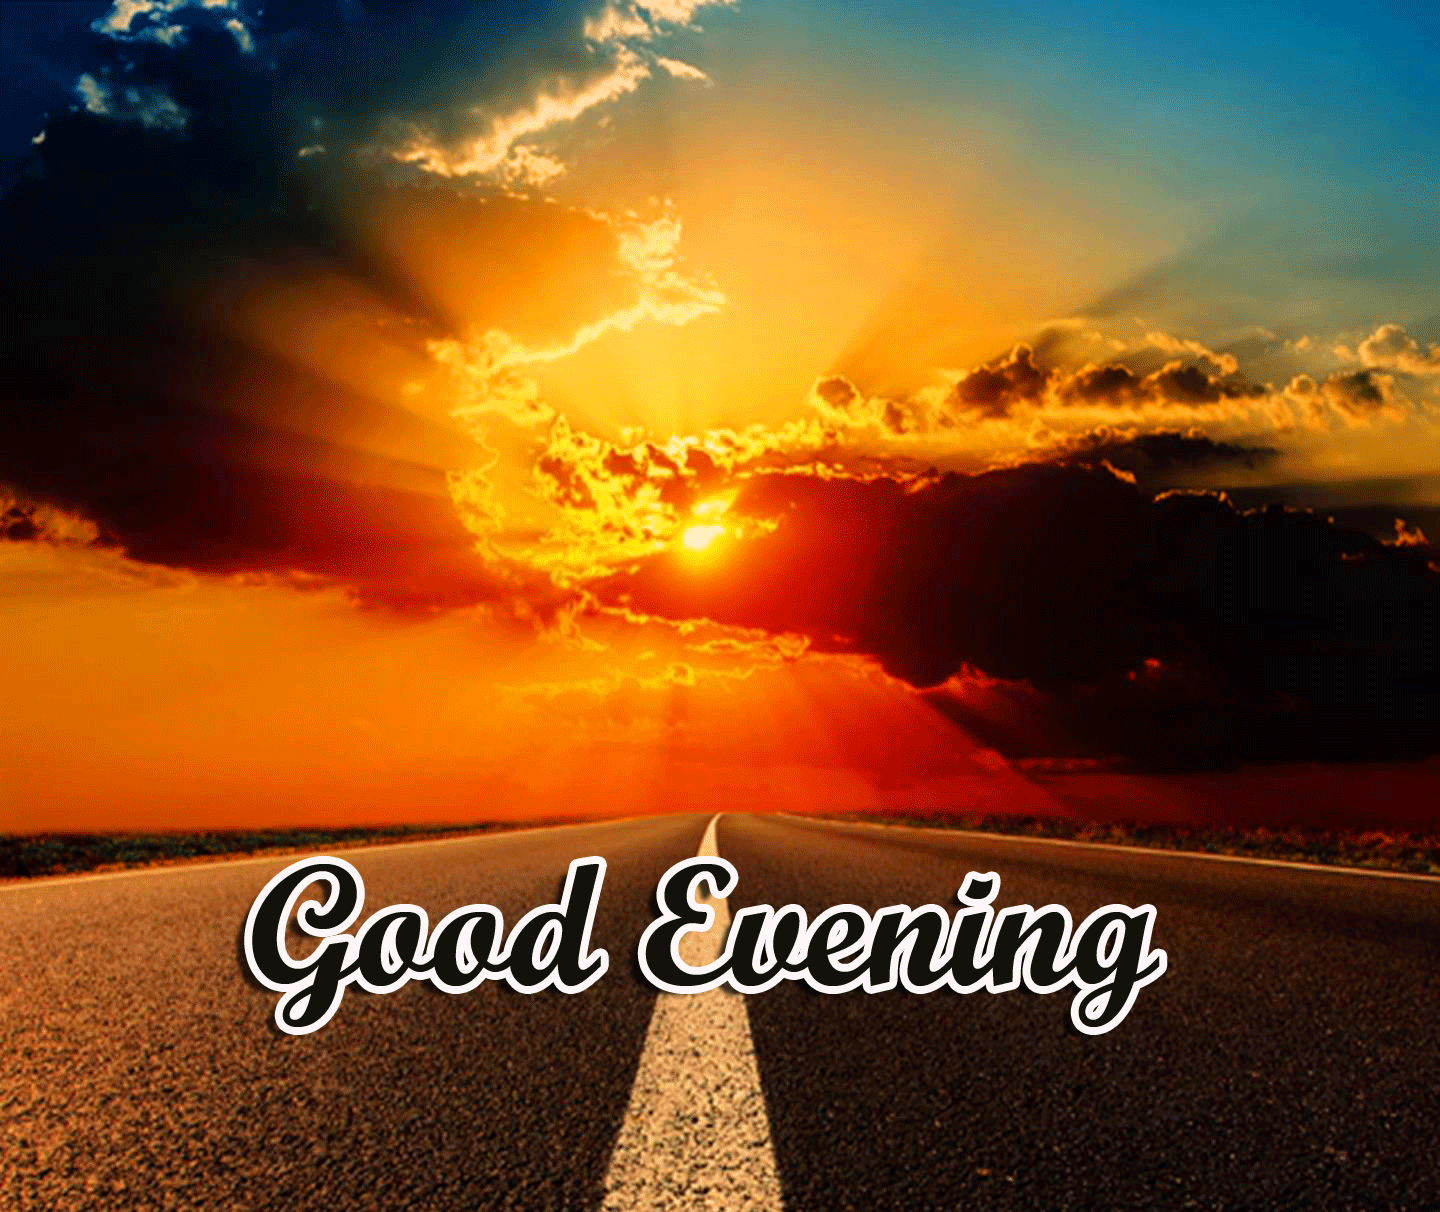 Good Evening Wishes Images Download 46